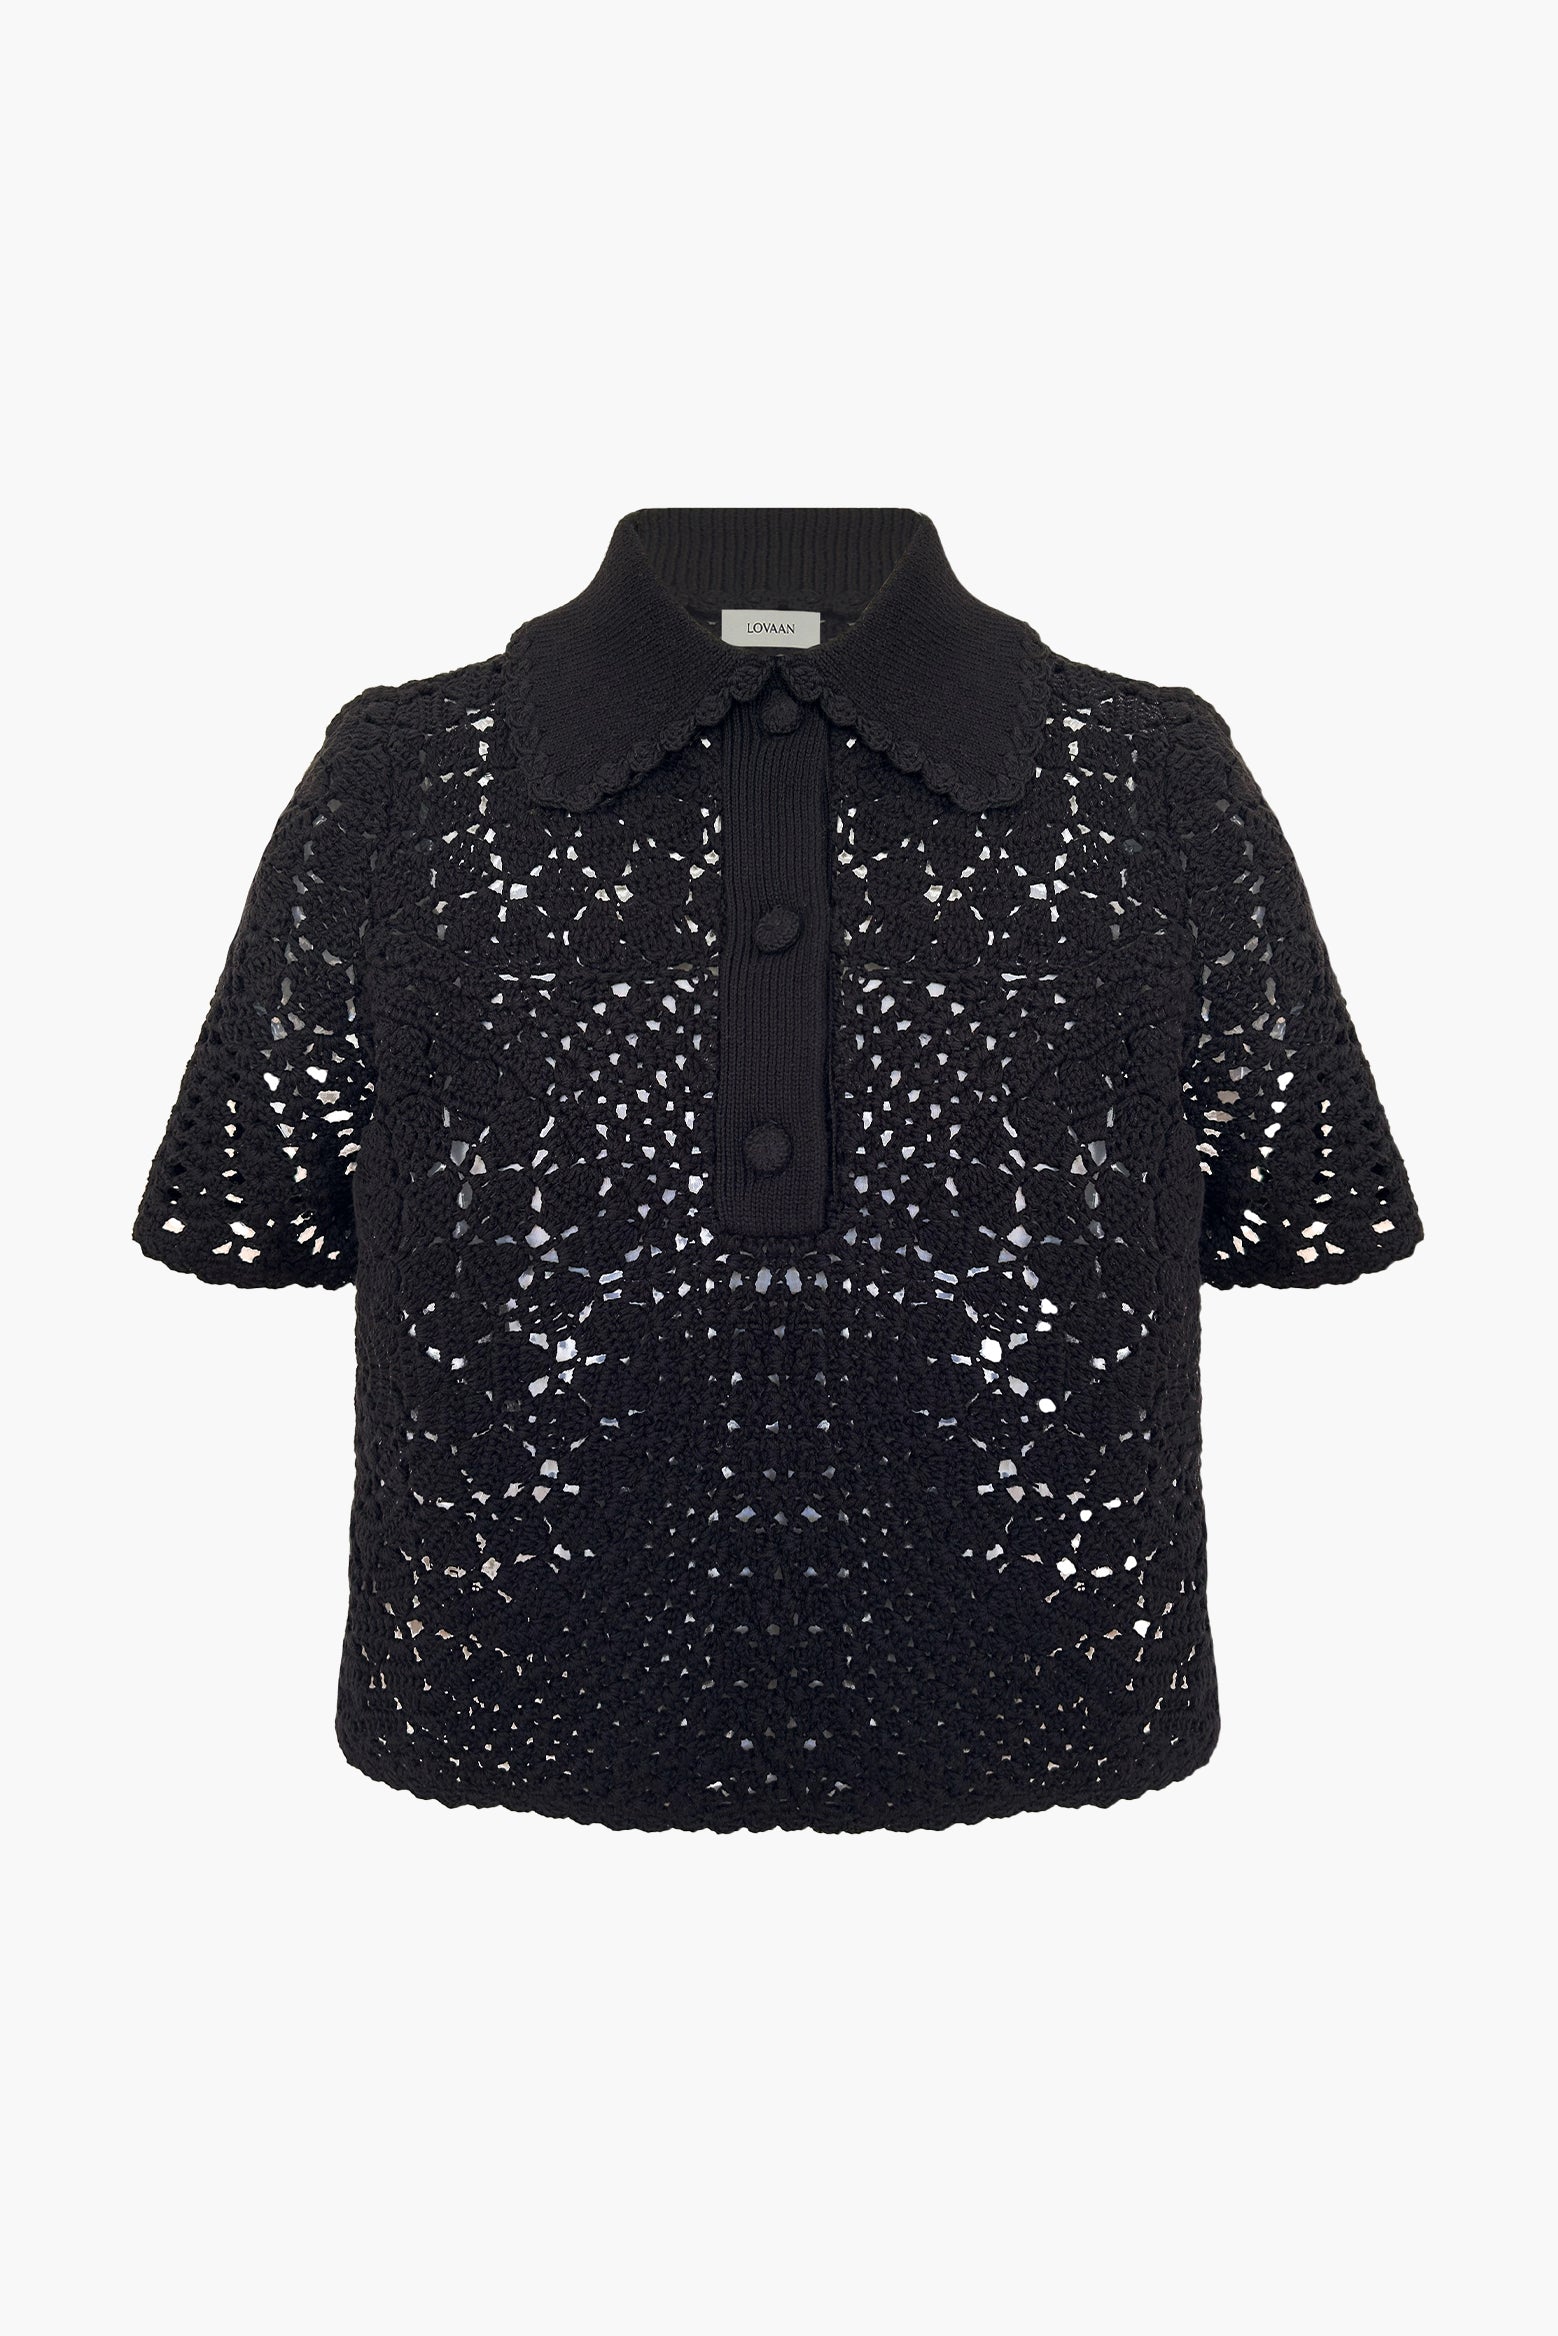 Lovaan Lily Polo in Black available at The New Trend Australia.